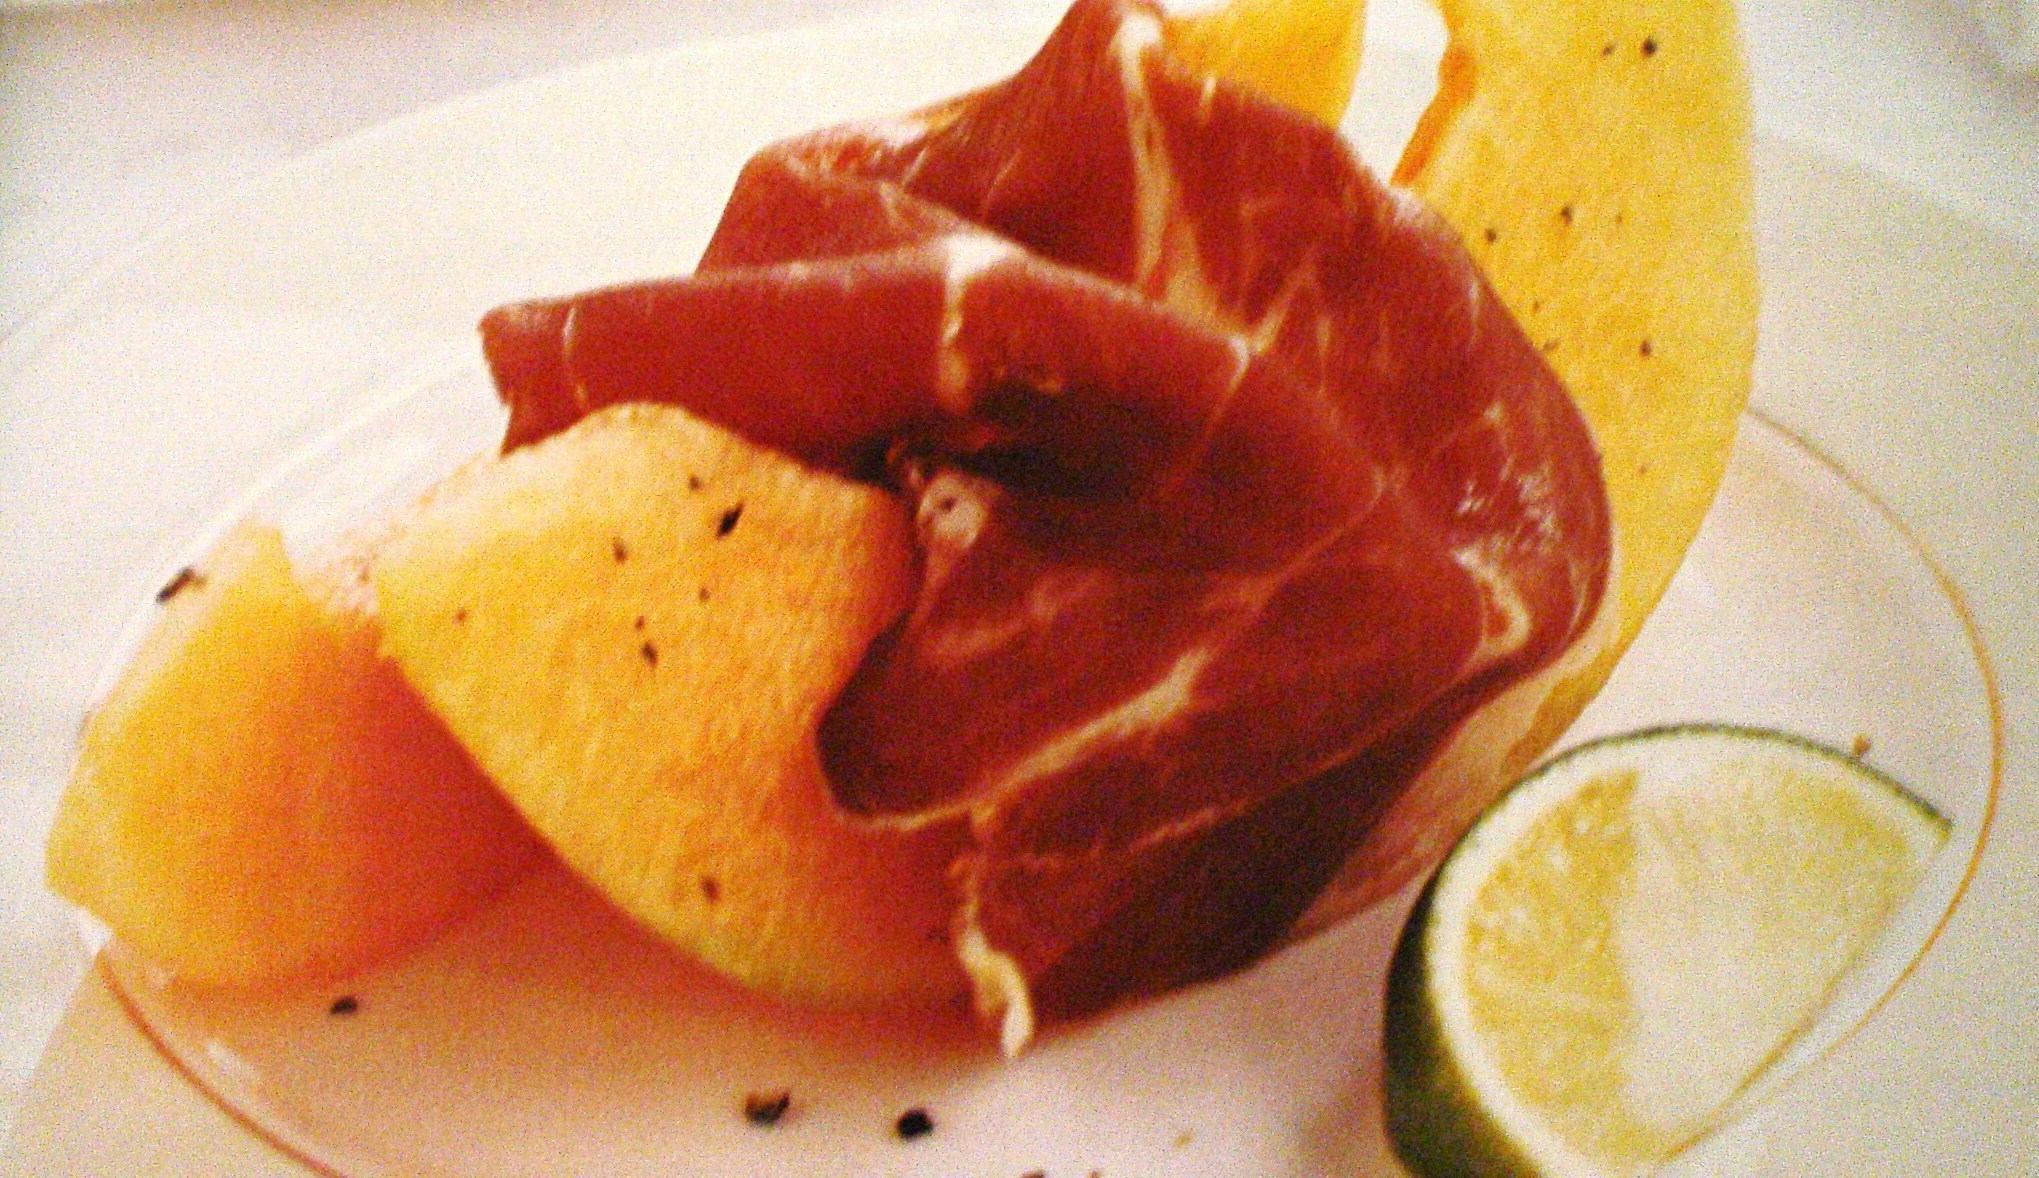 Italian Food images melon and prosciutto HD wallpaper and background ...